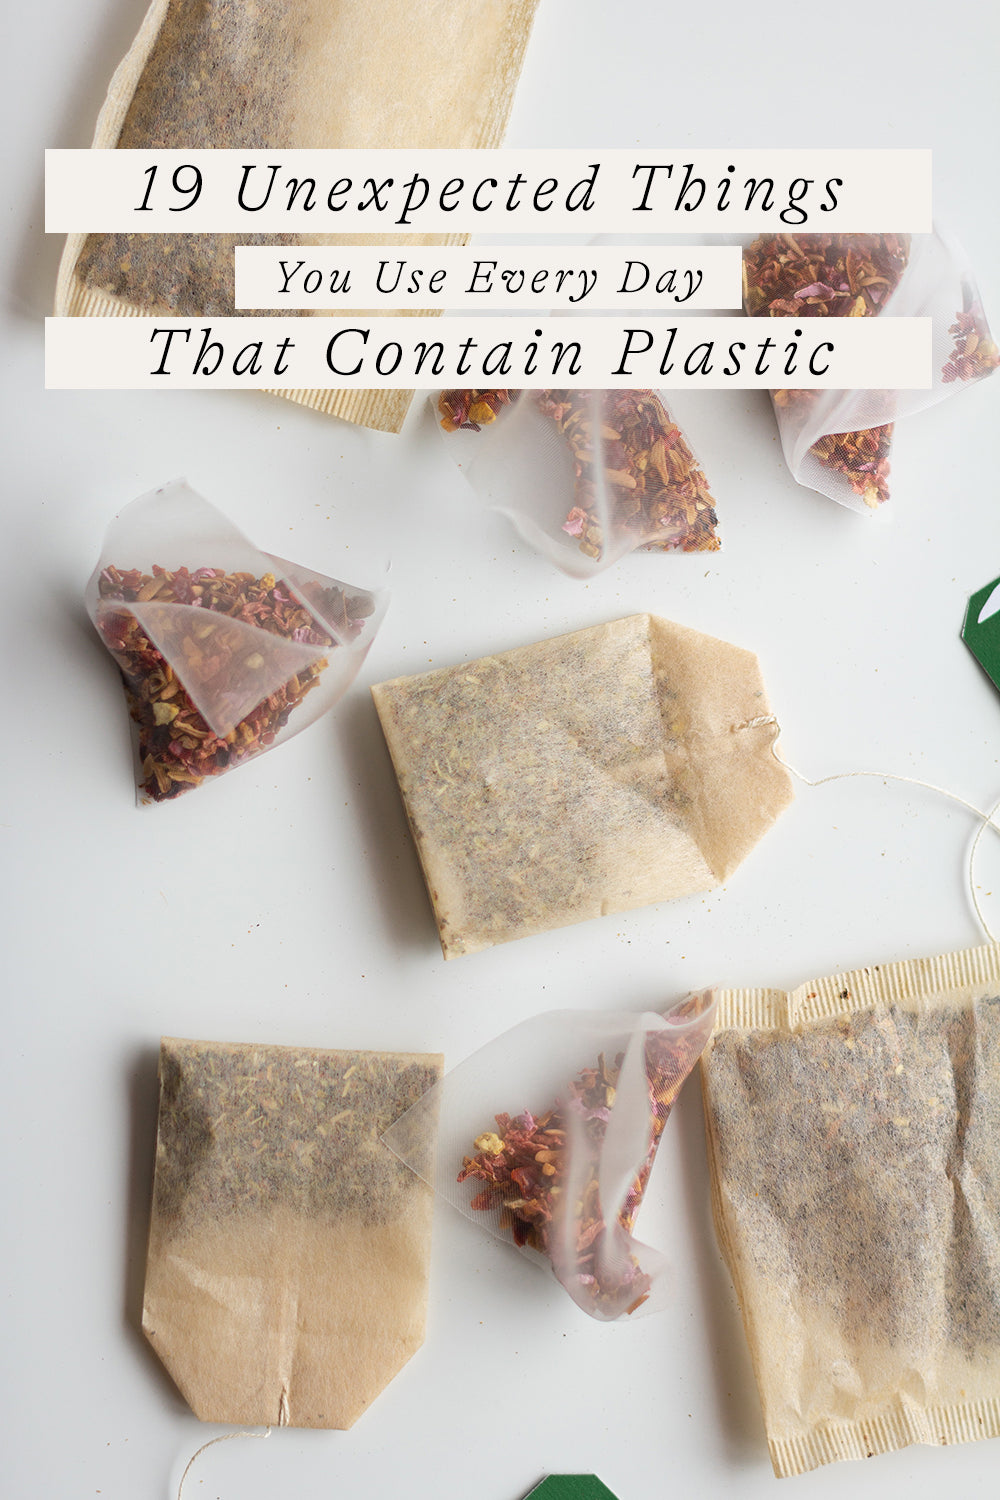 19 unexpected things that contain plastic.